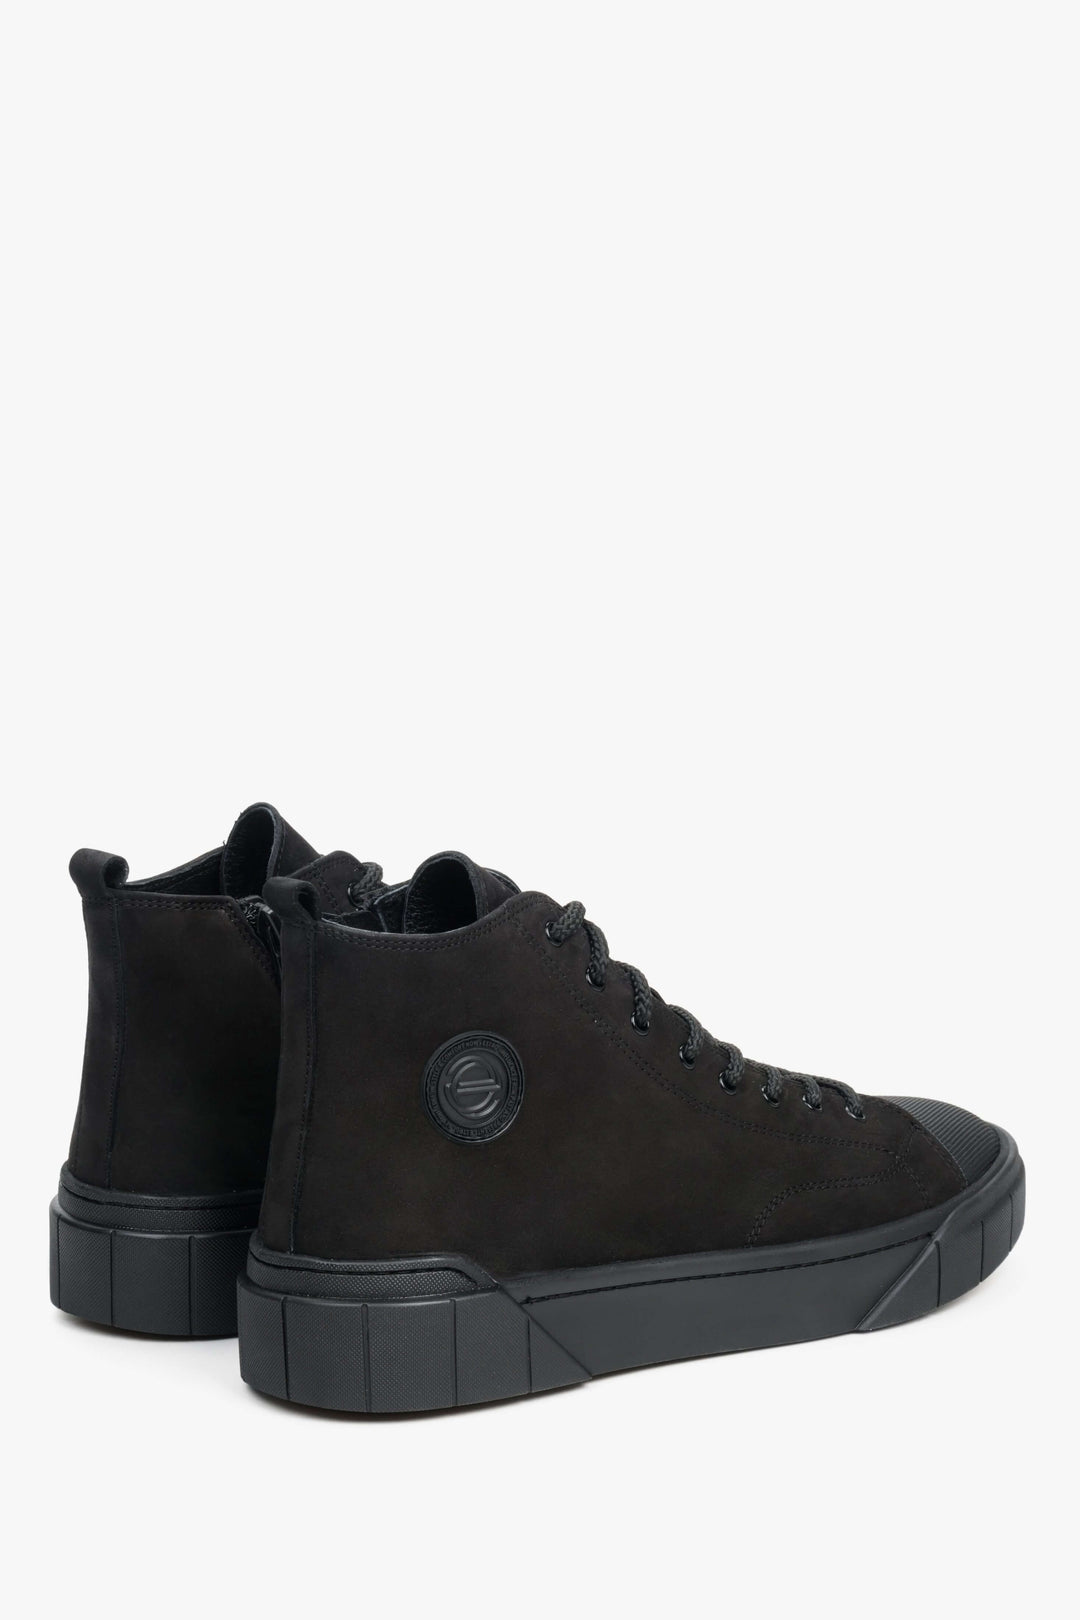 High-top black men's lace-up sneakers by Estro.